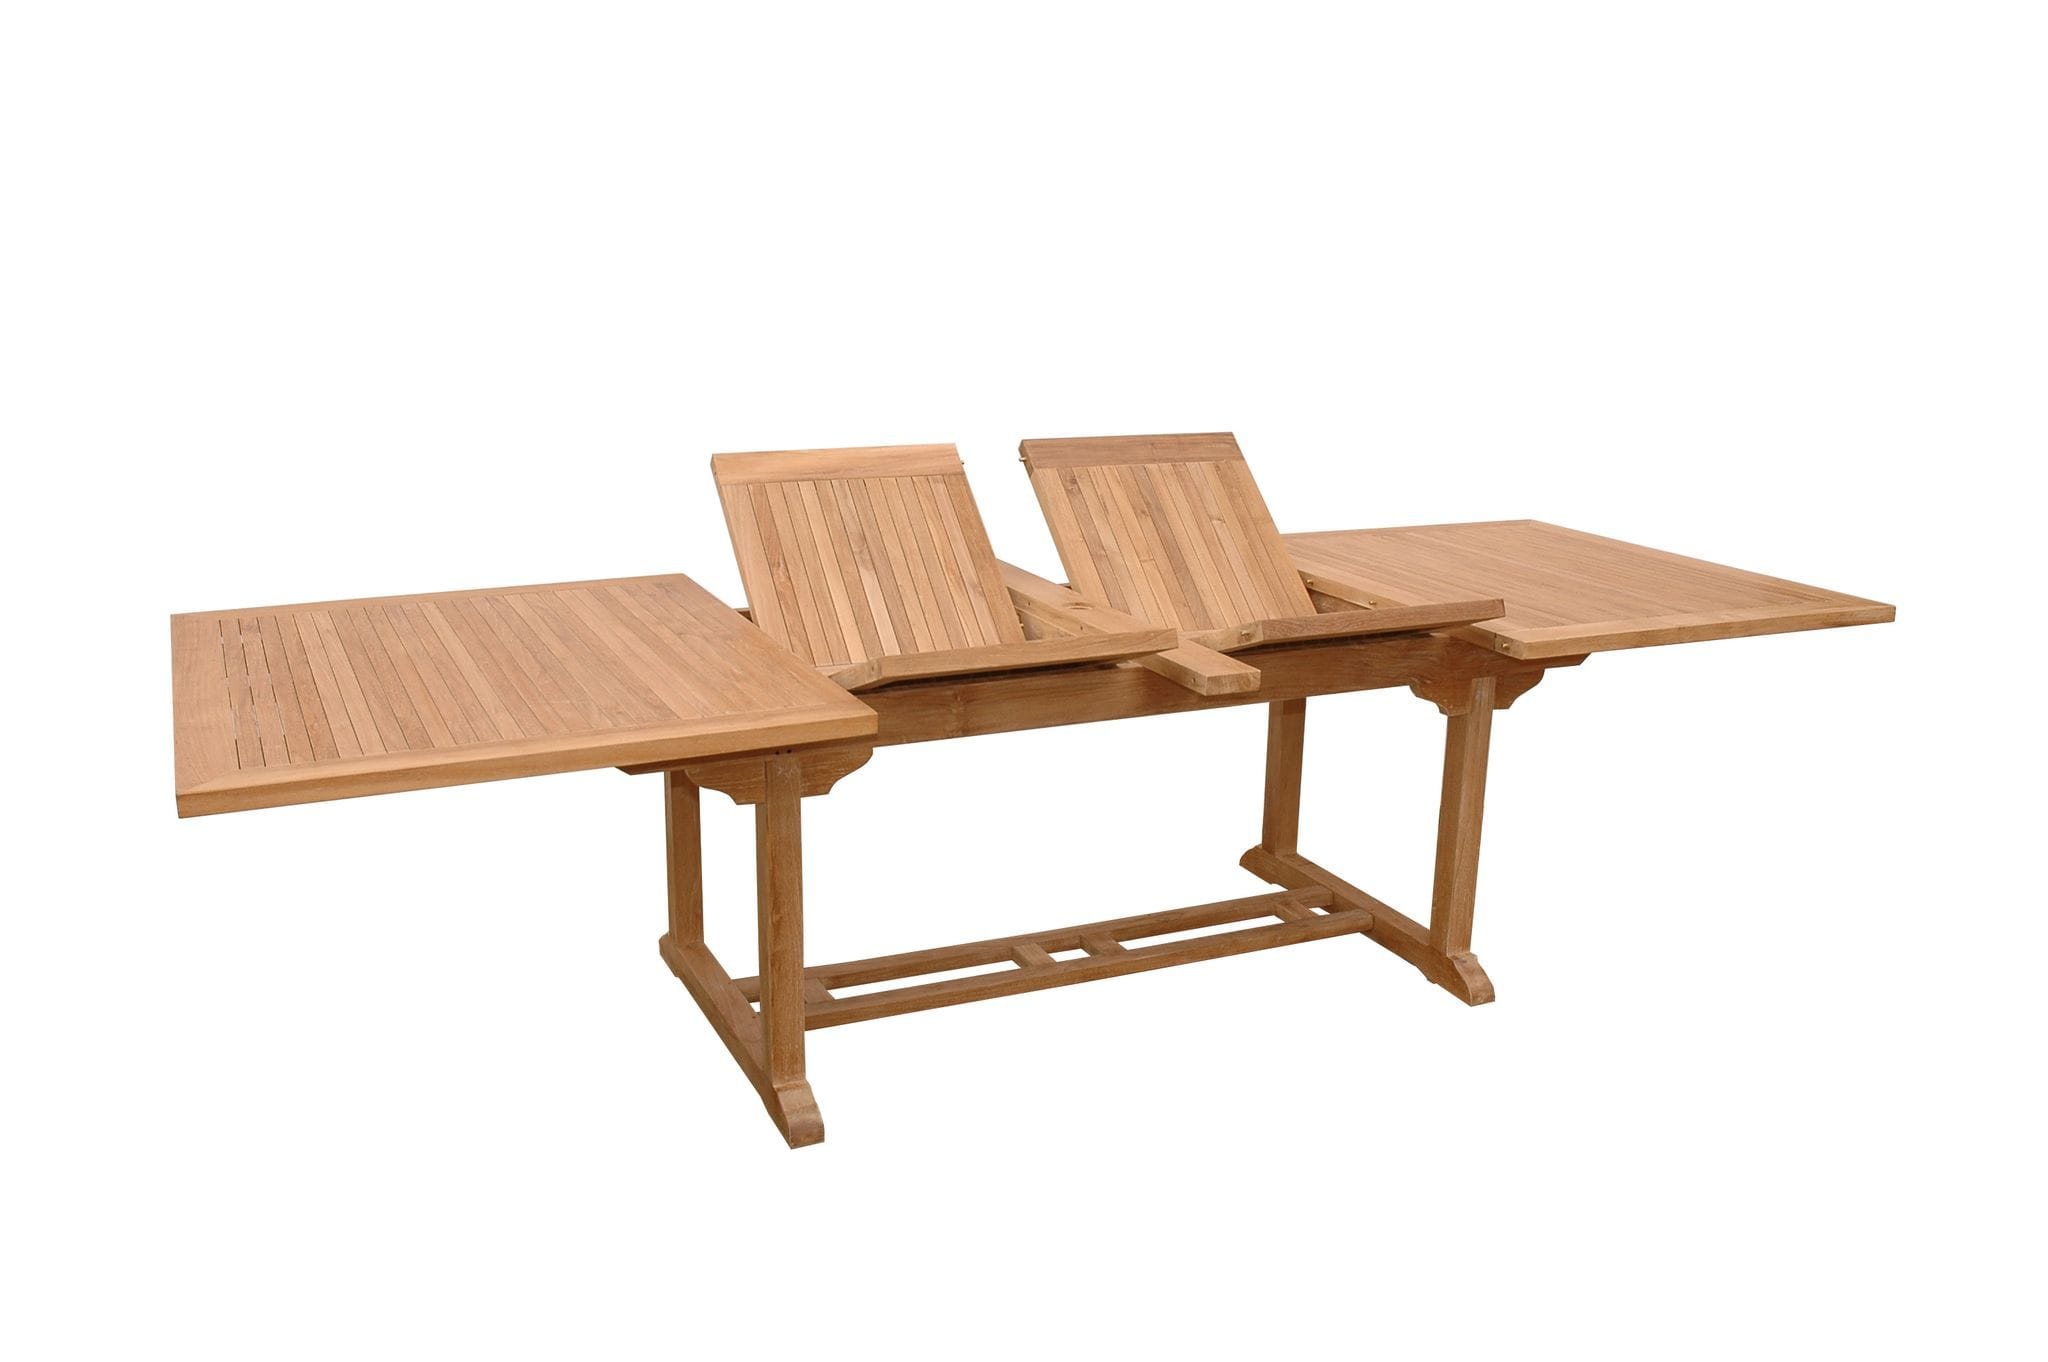 Anderson Teak Outdoor Table Anderson Teak Valencia 117" Rectangular Table w/ Double Extensions